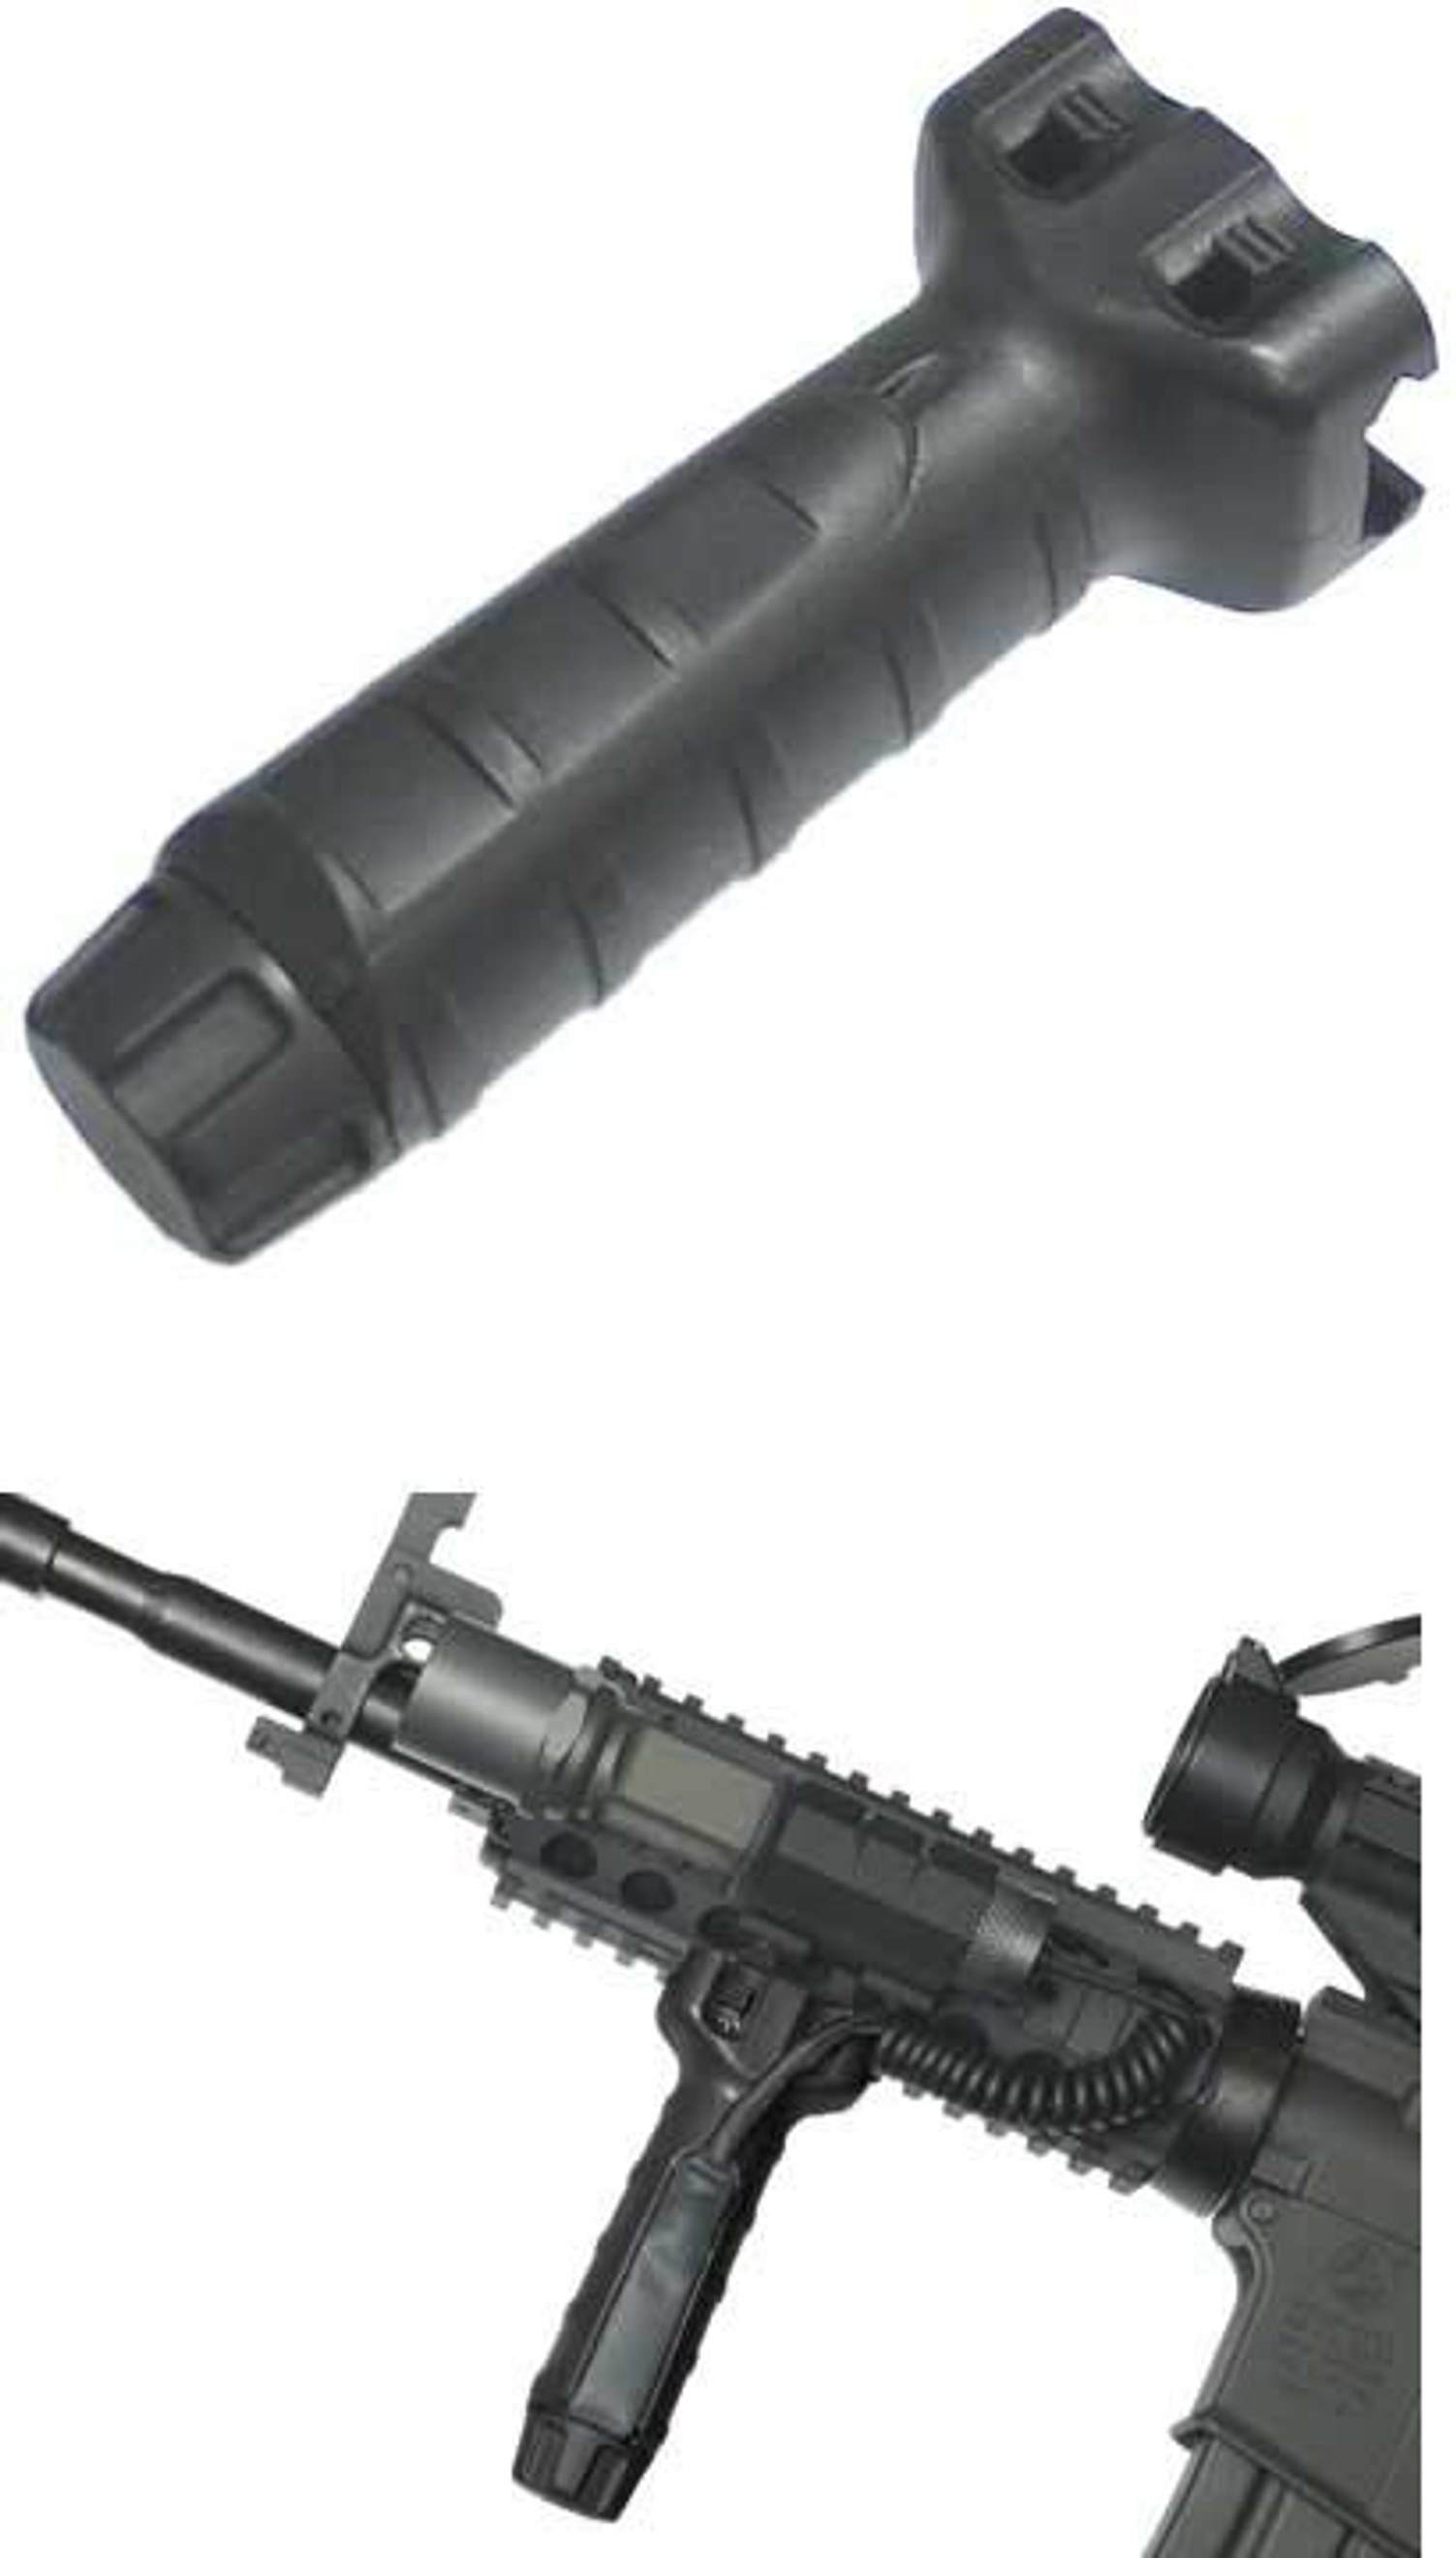 G&P Raider Type R.I.S. Vertical Support Weaver Foregrip for Airsoft - Black